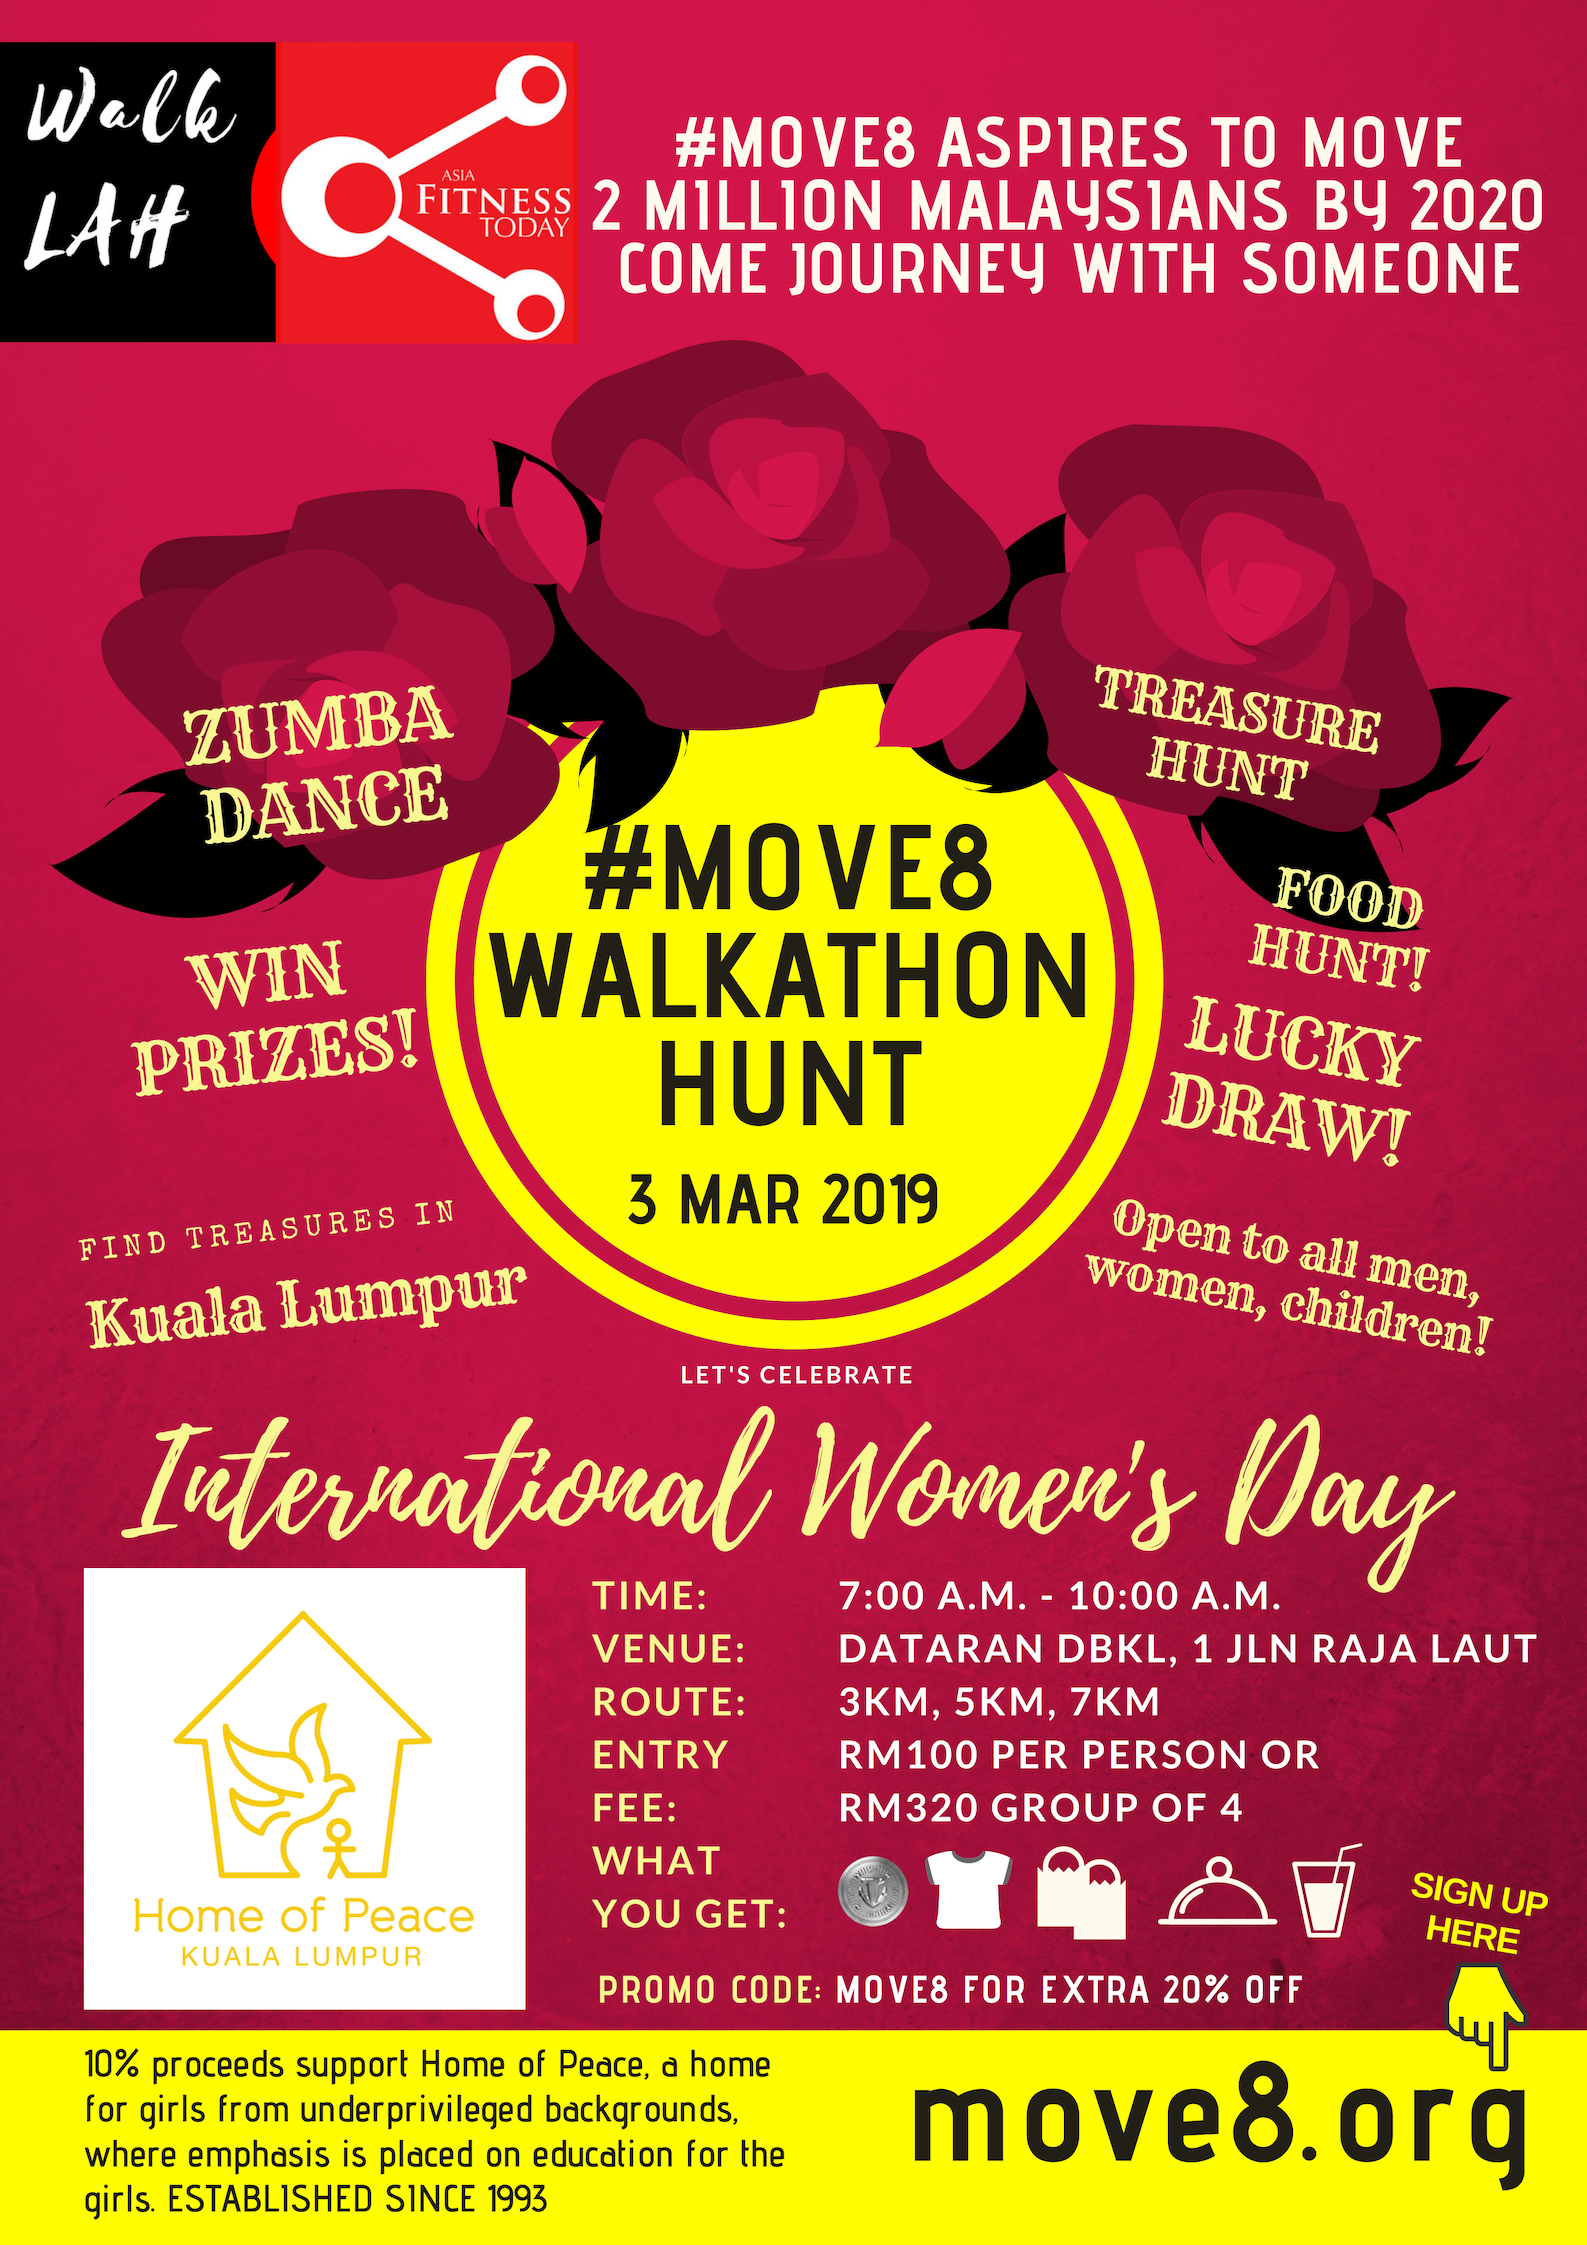 Walk with a woman this International Women’s Day